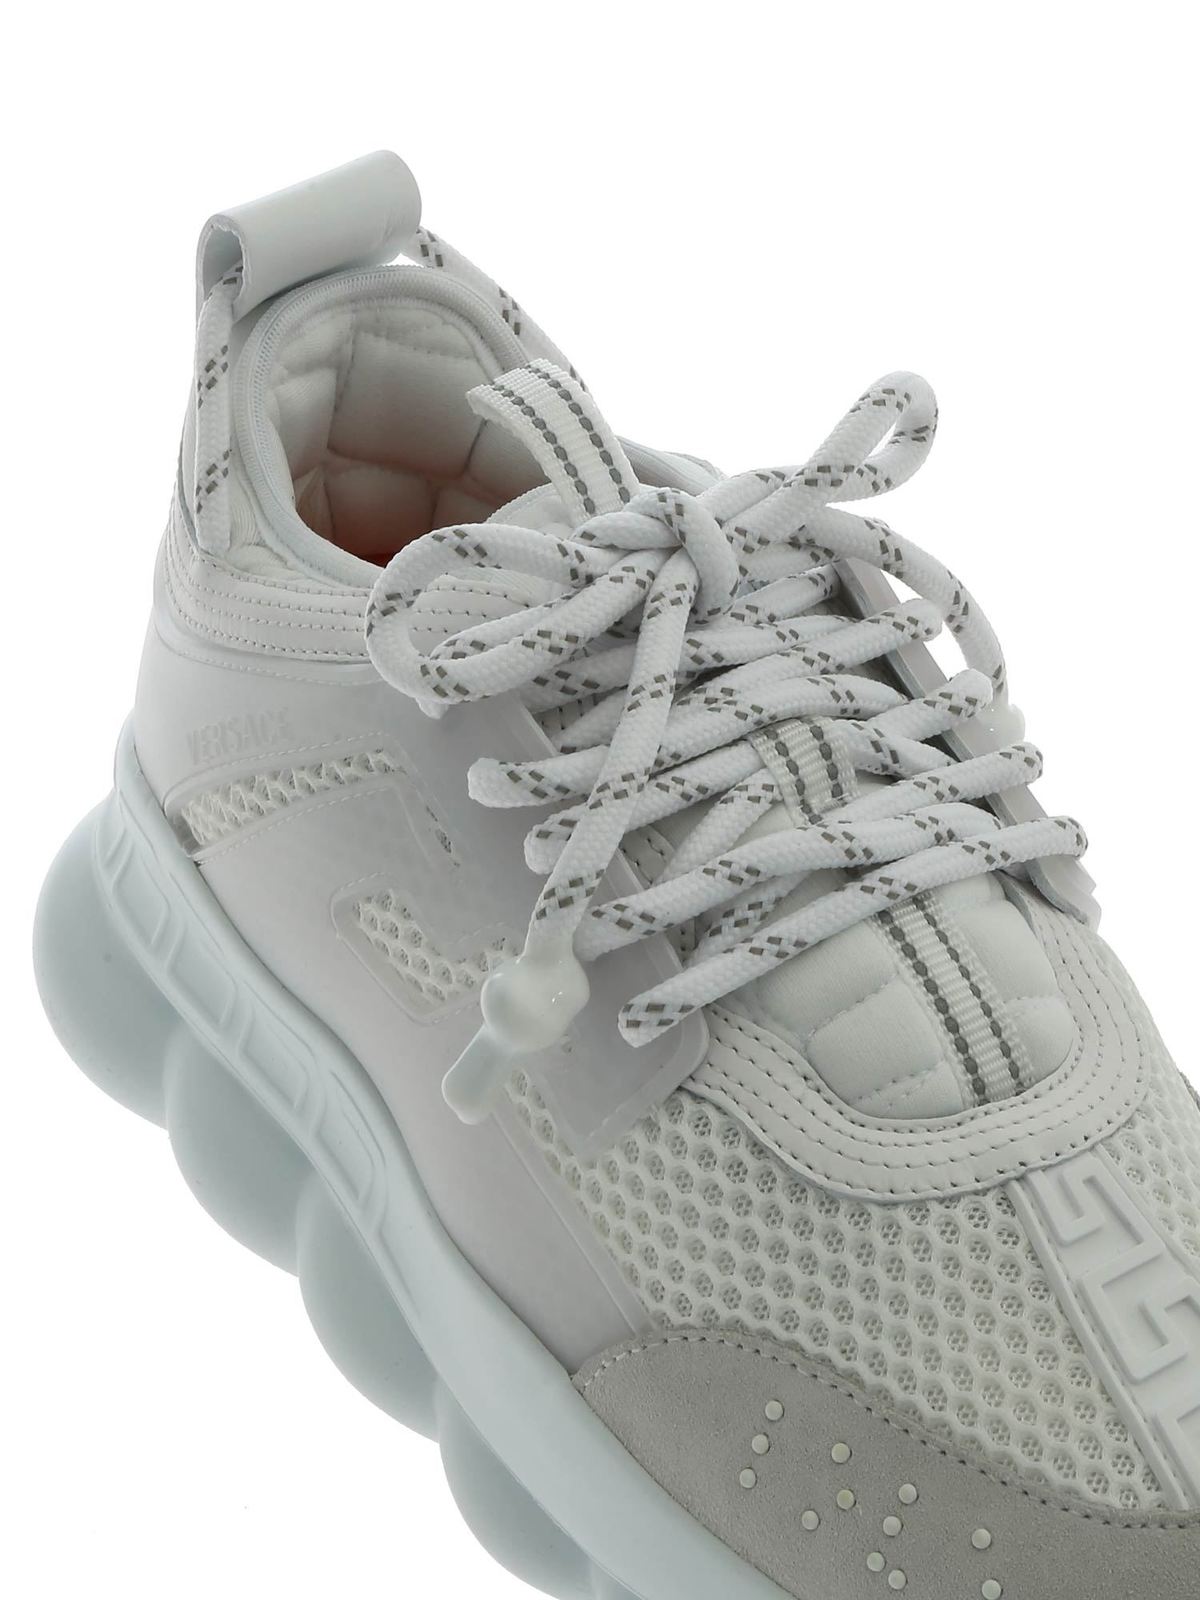 Versace Chain Reaction Panelled Mesh Sneakers - BAGAHOLICBOY